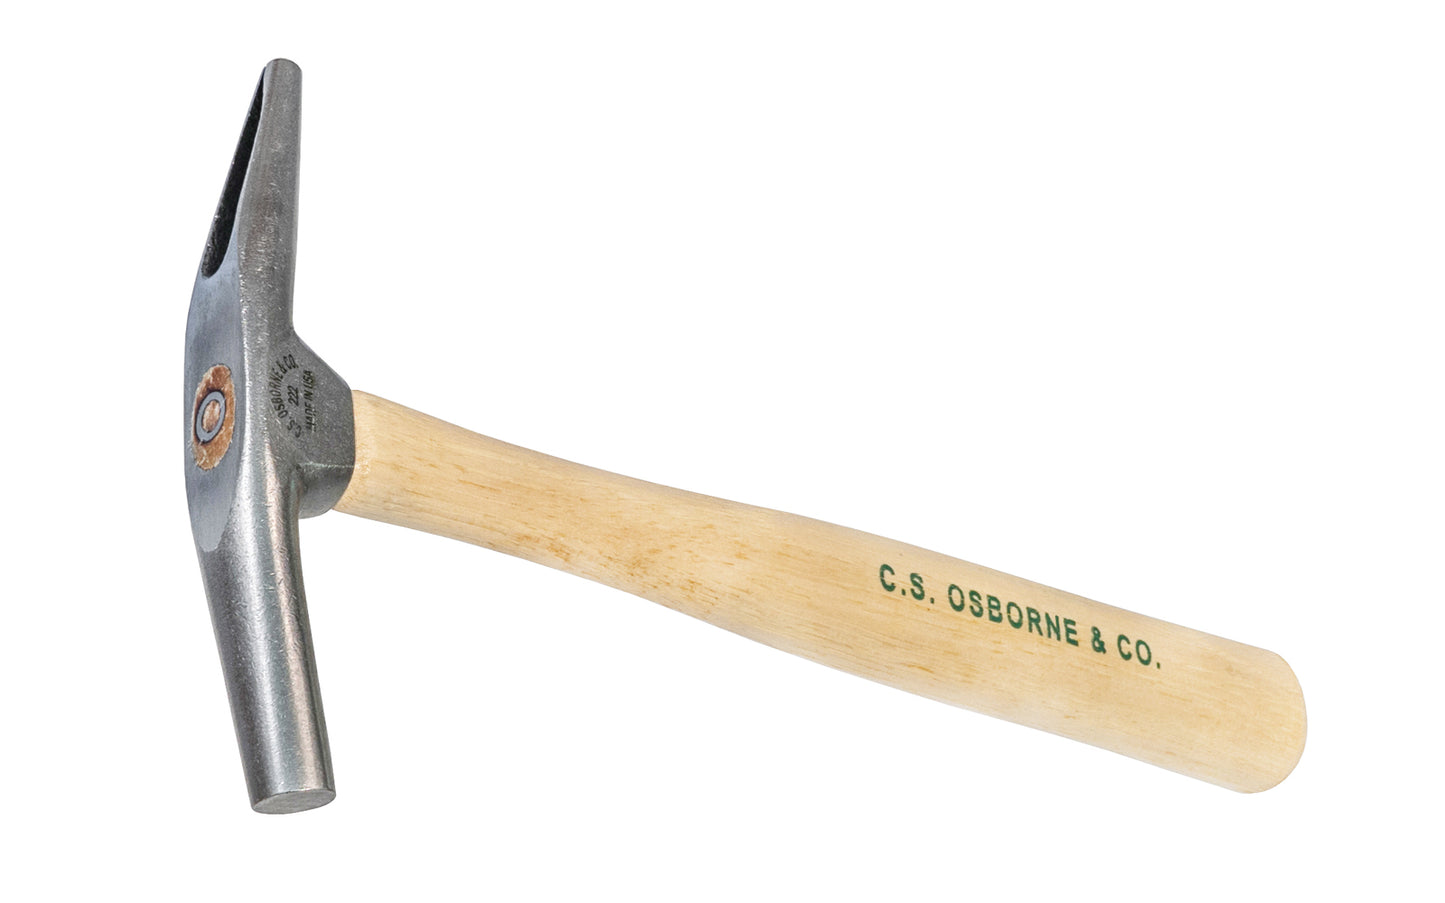 Made in USA · Models No. 222 ~ Split-head magnetic tack hammer made by C.S. Osborne. Forged steel material - One hammer-end has a permanent magnetic embedded - Split End helps when working with small brads, tacks, & nails. A great hammer for leatherwork, furniture & upholstery work - 096685556012 - Polished split-head